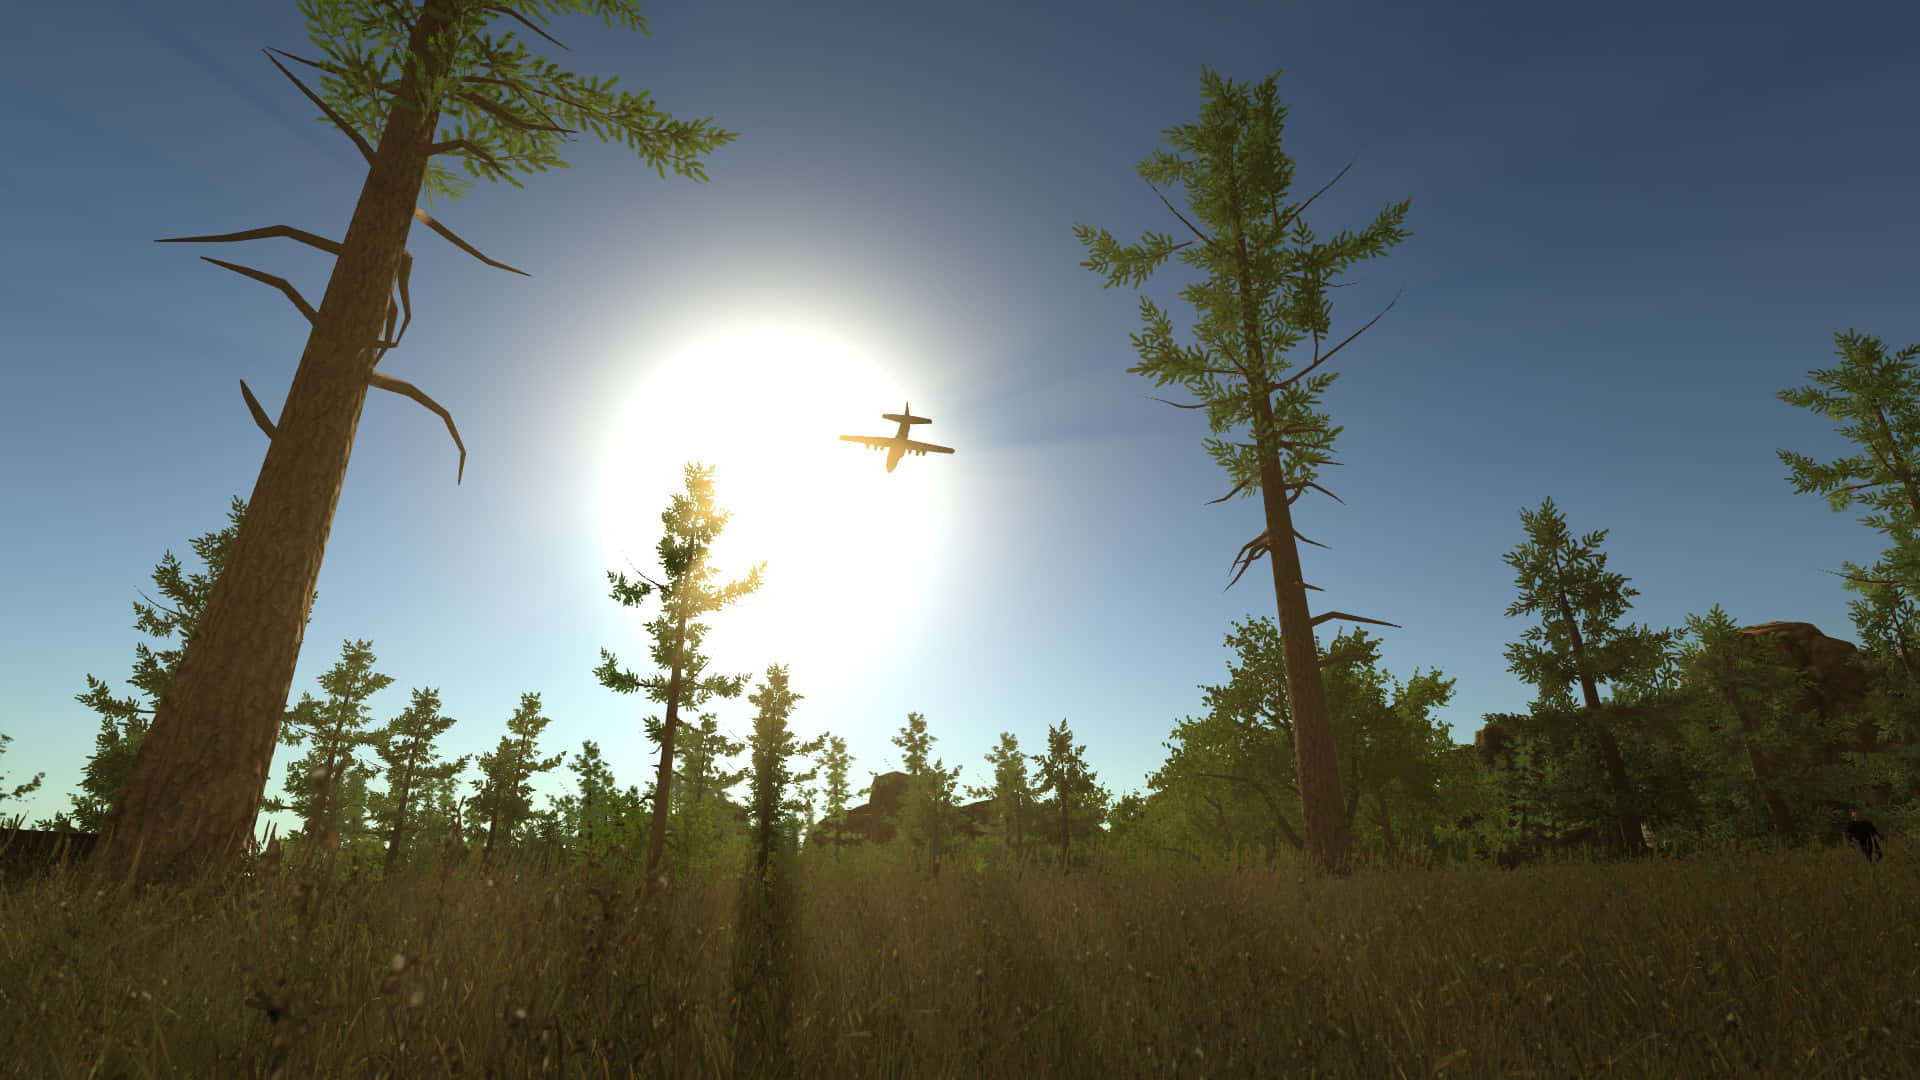 A Plane Flying Over A Field Of Trees